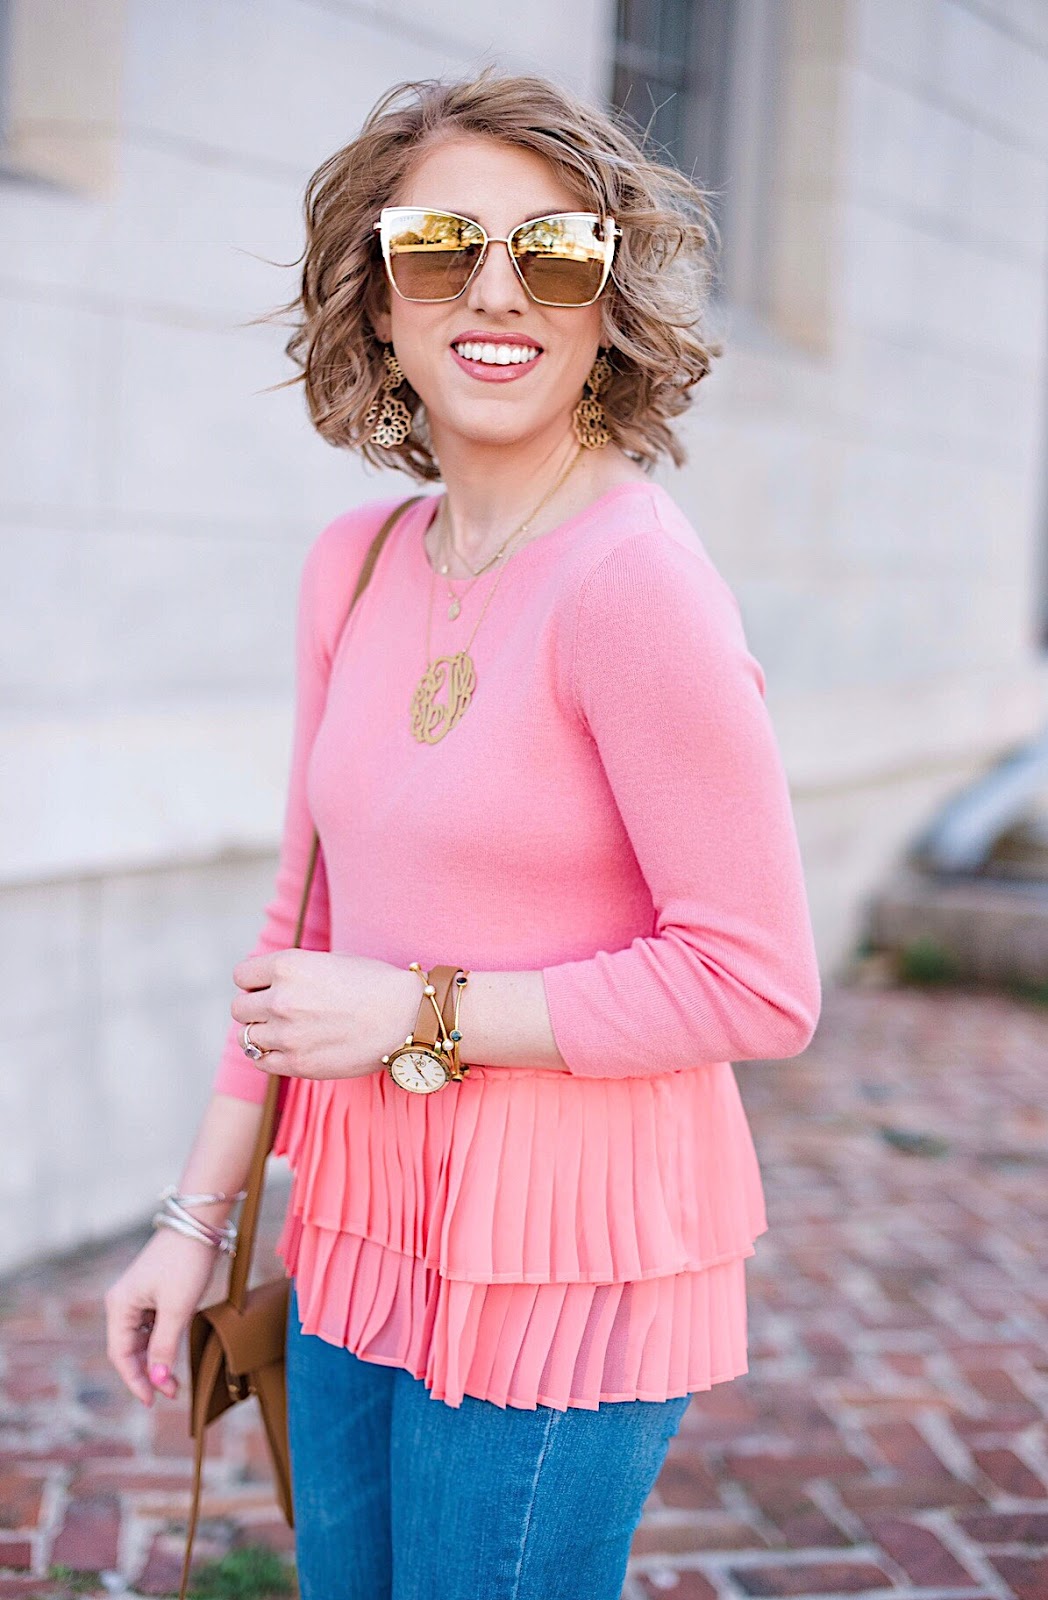 Transition to spring - Ruffle Hem Sweater - Click through for more on Something Delightful Blog